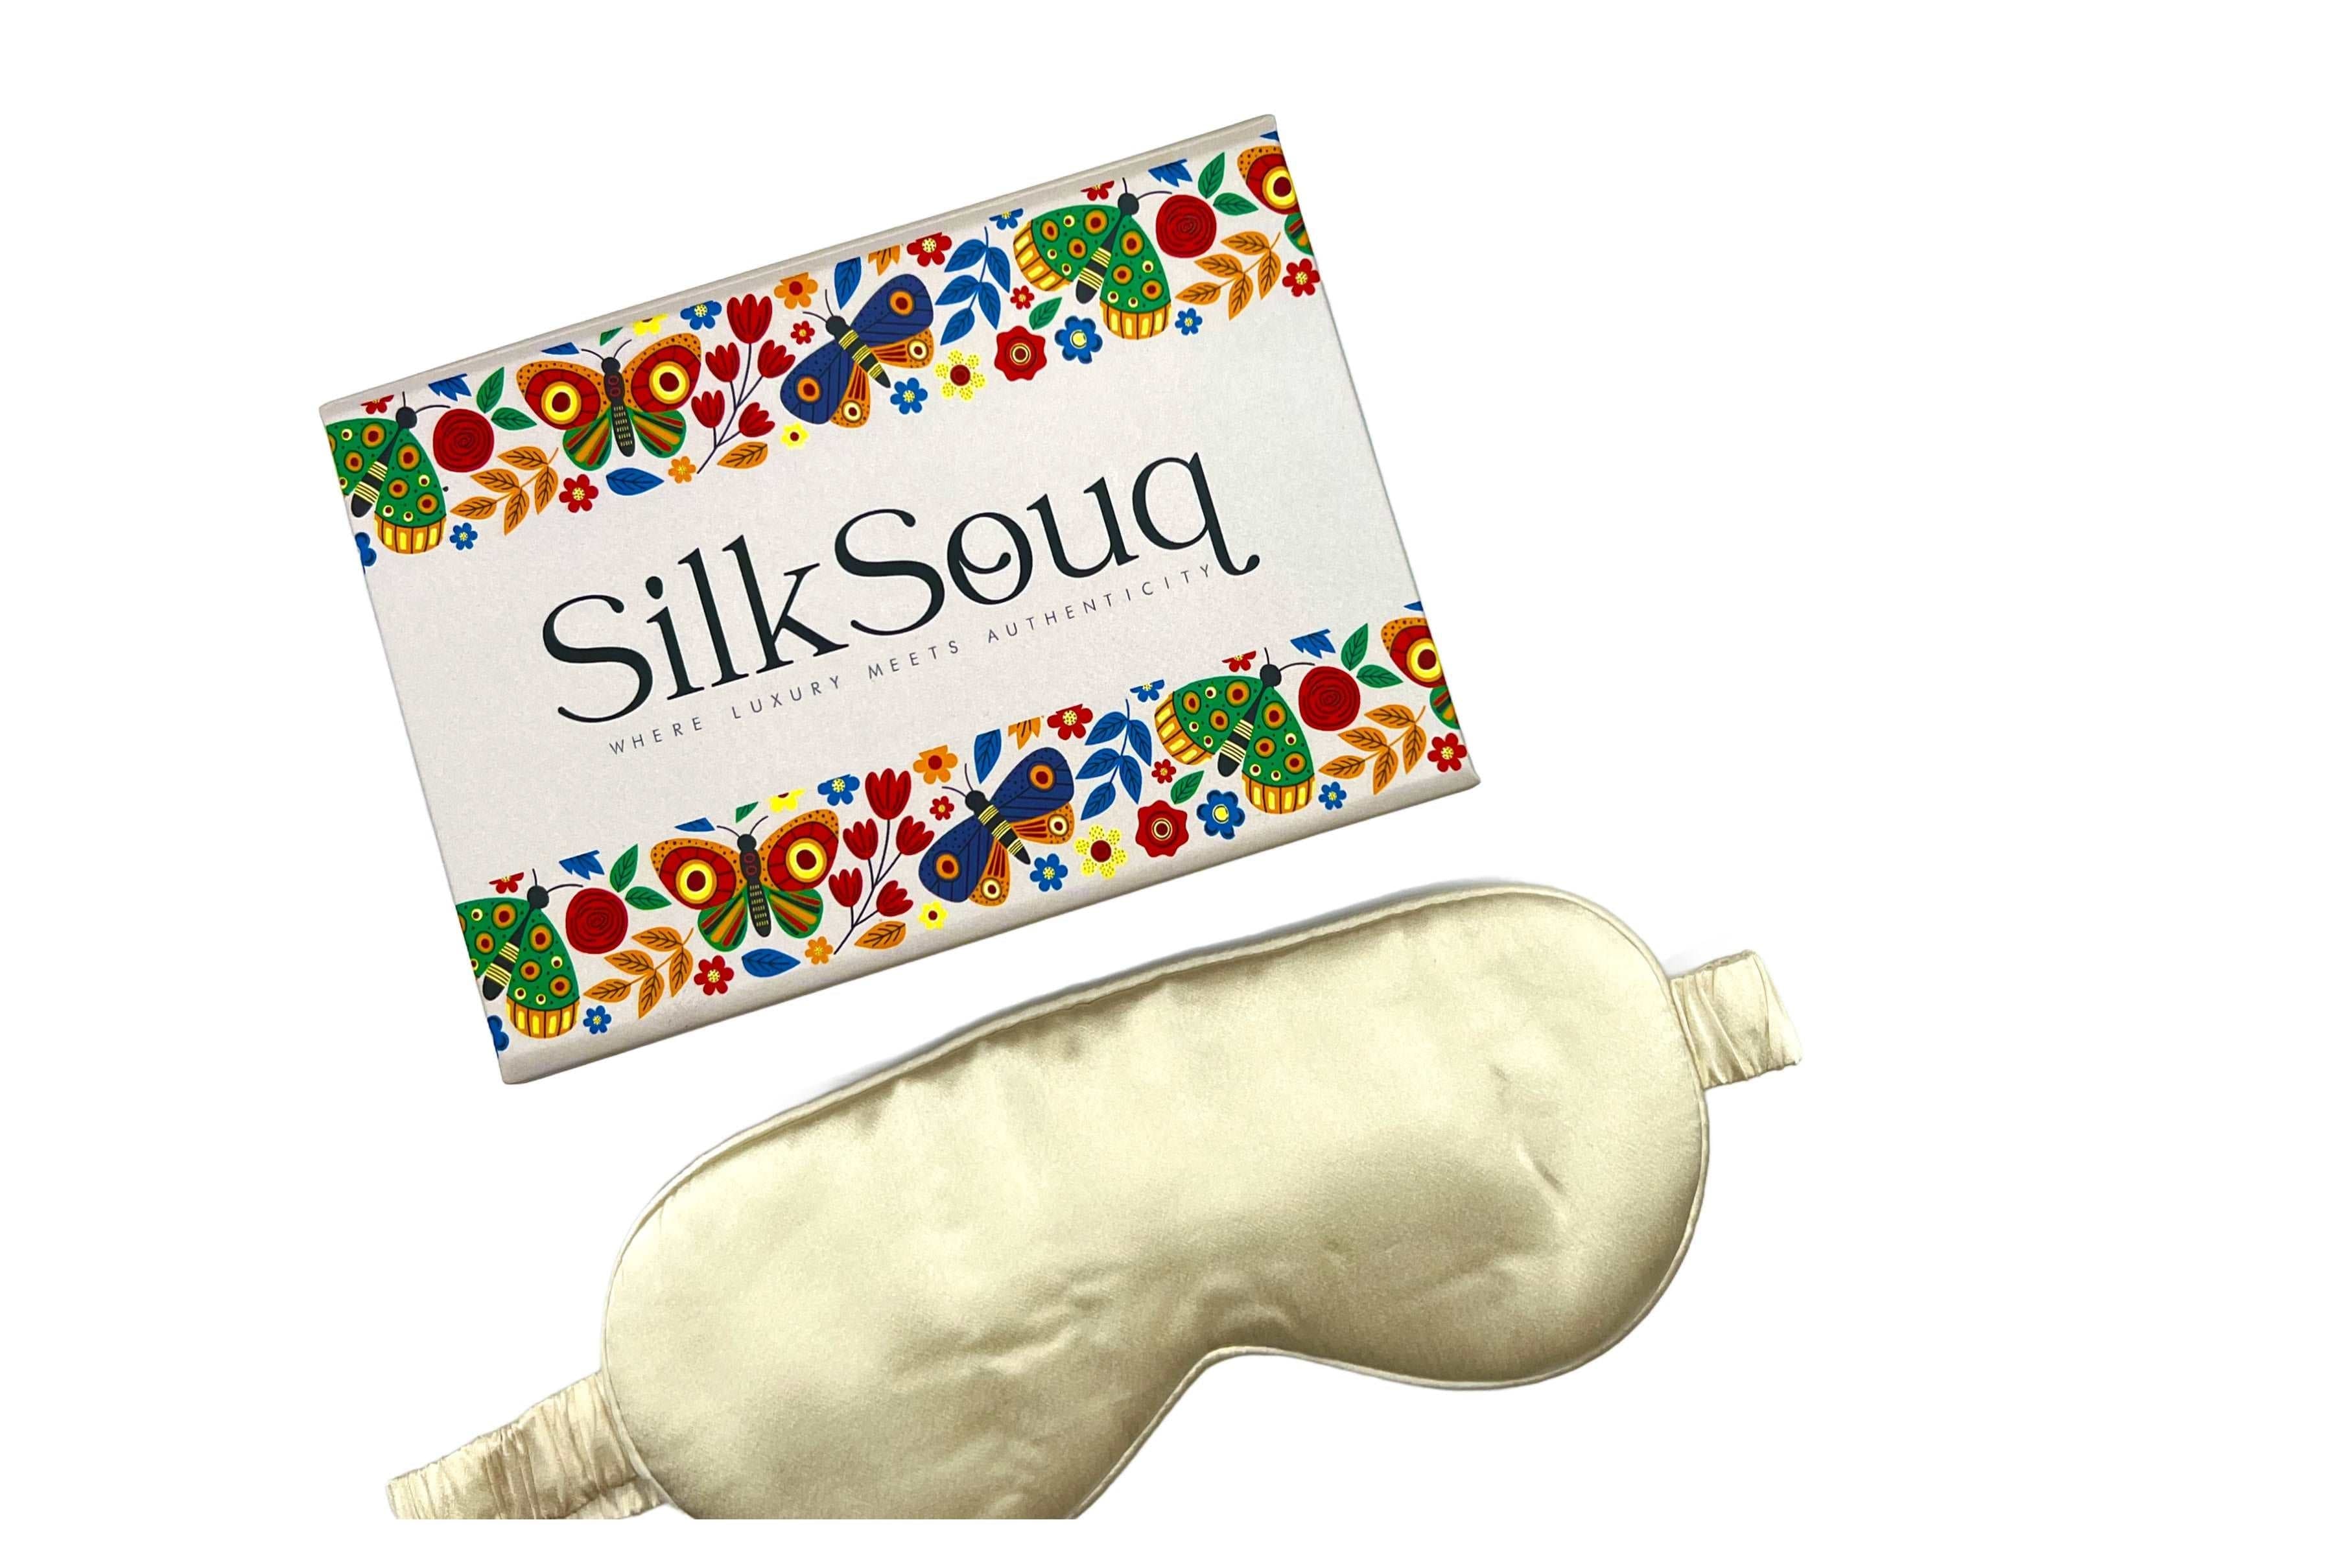 Pure Mulberry Silk Eyemask From Silksouq & Silksouk, Also Known As Silk Souq In Uae